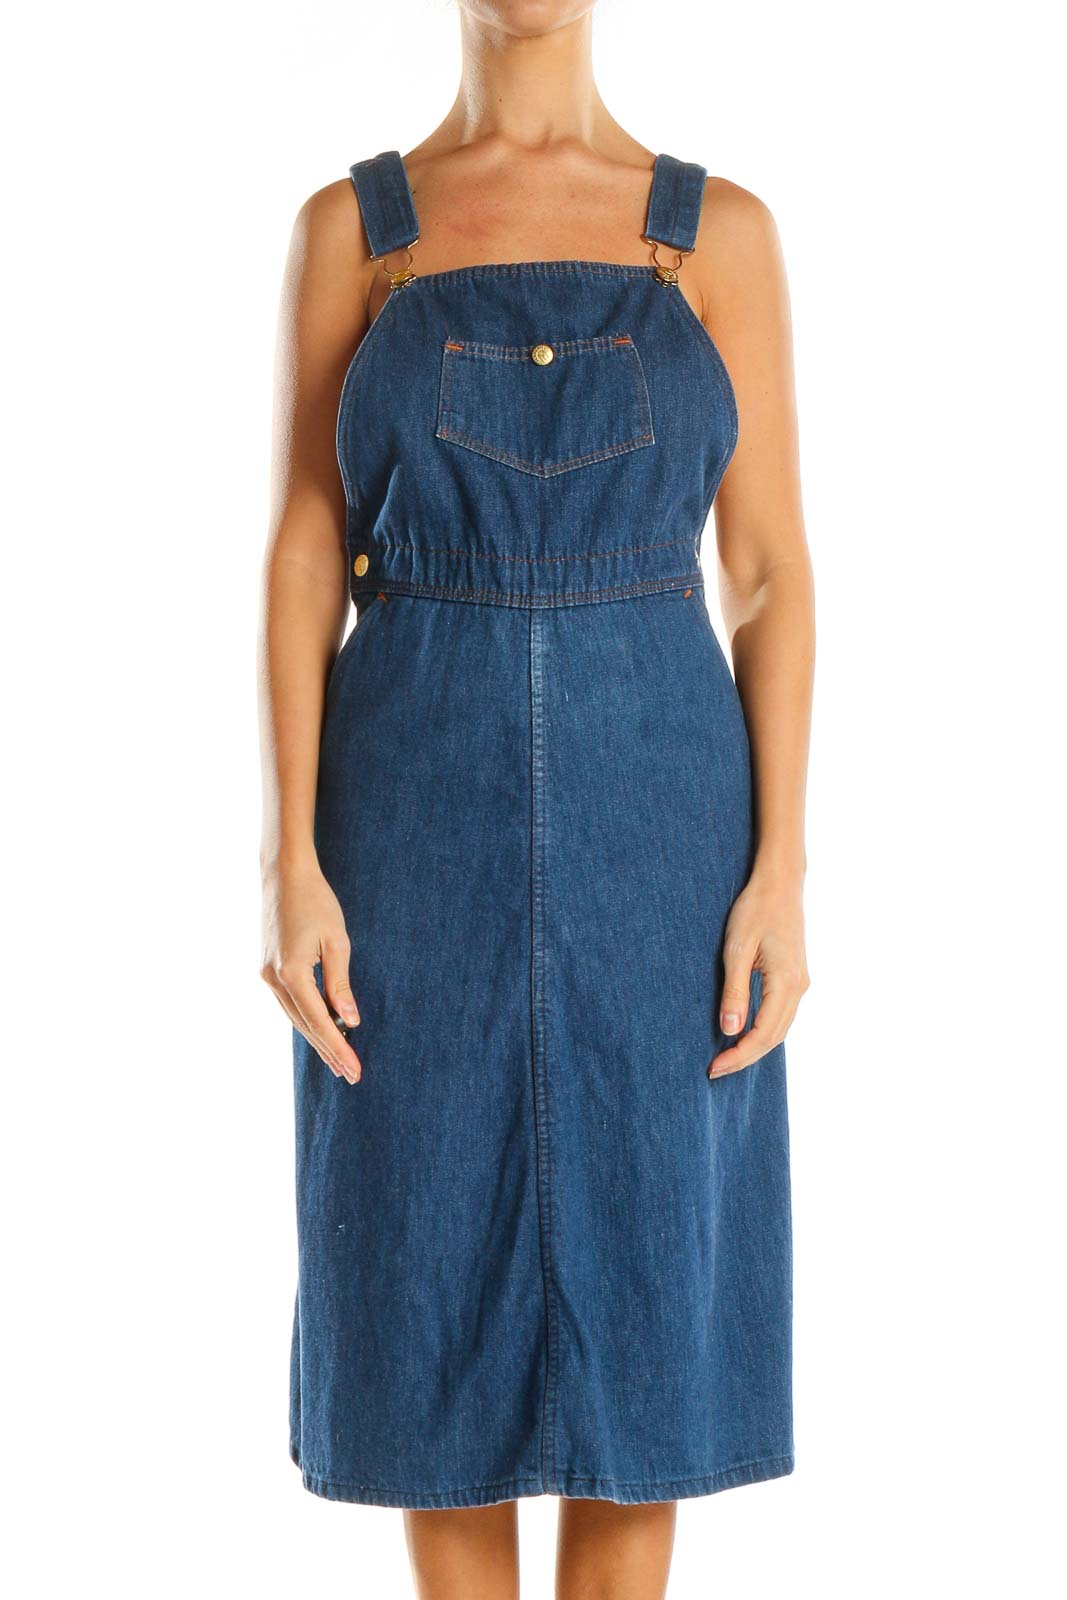 Blue Solid Bohemian Overall Dress Front